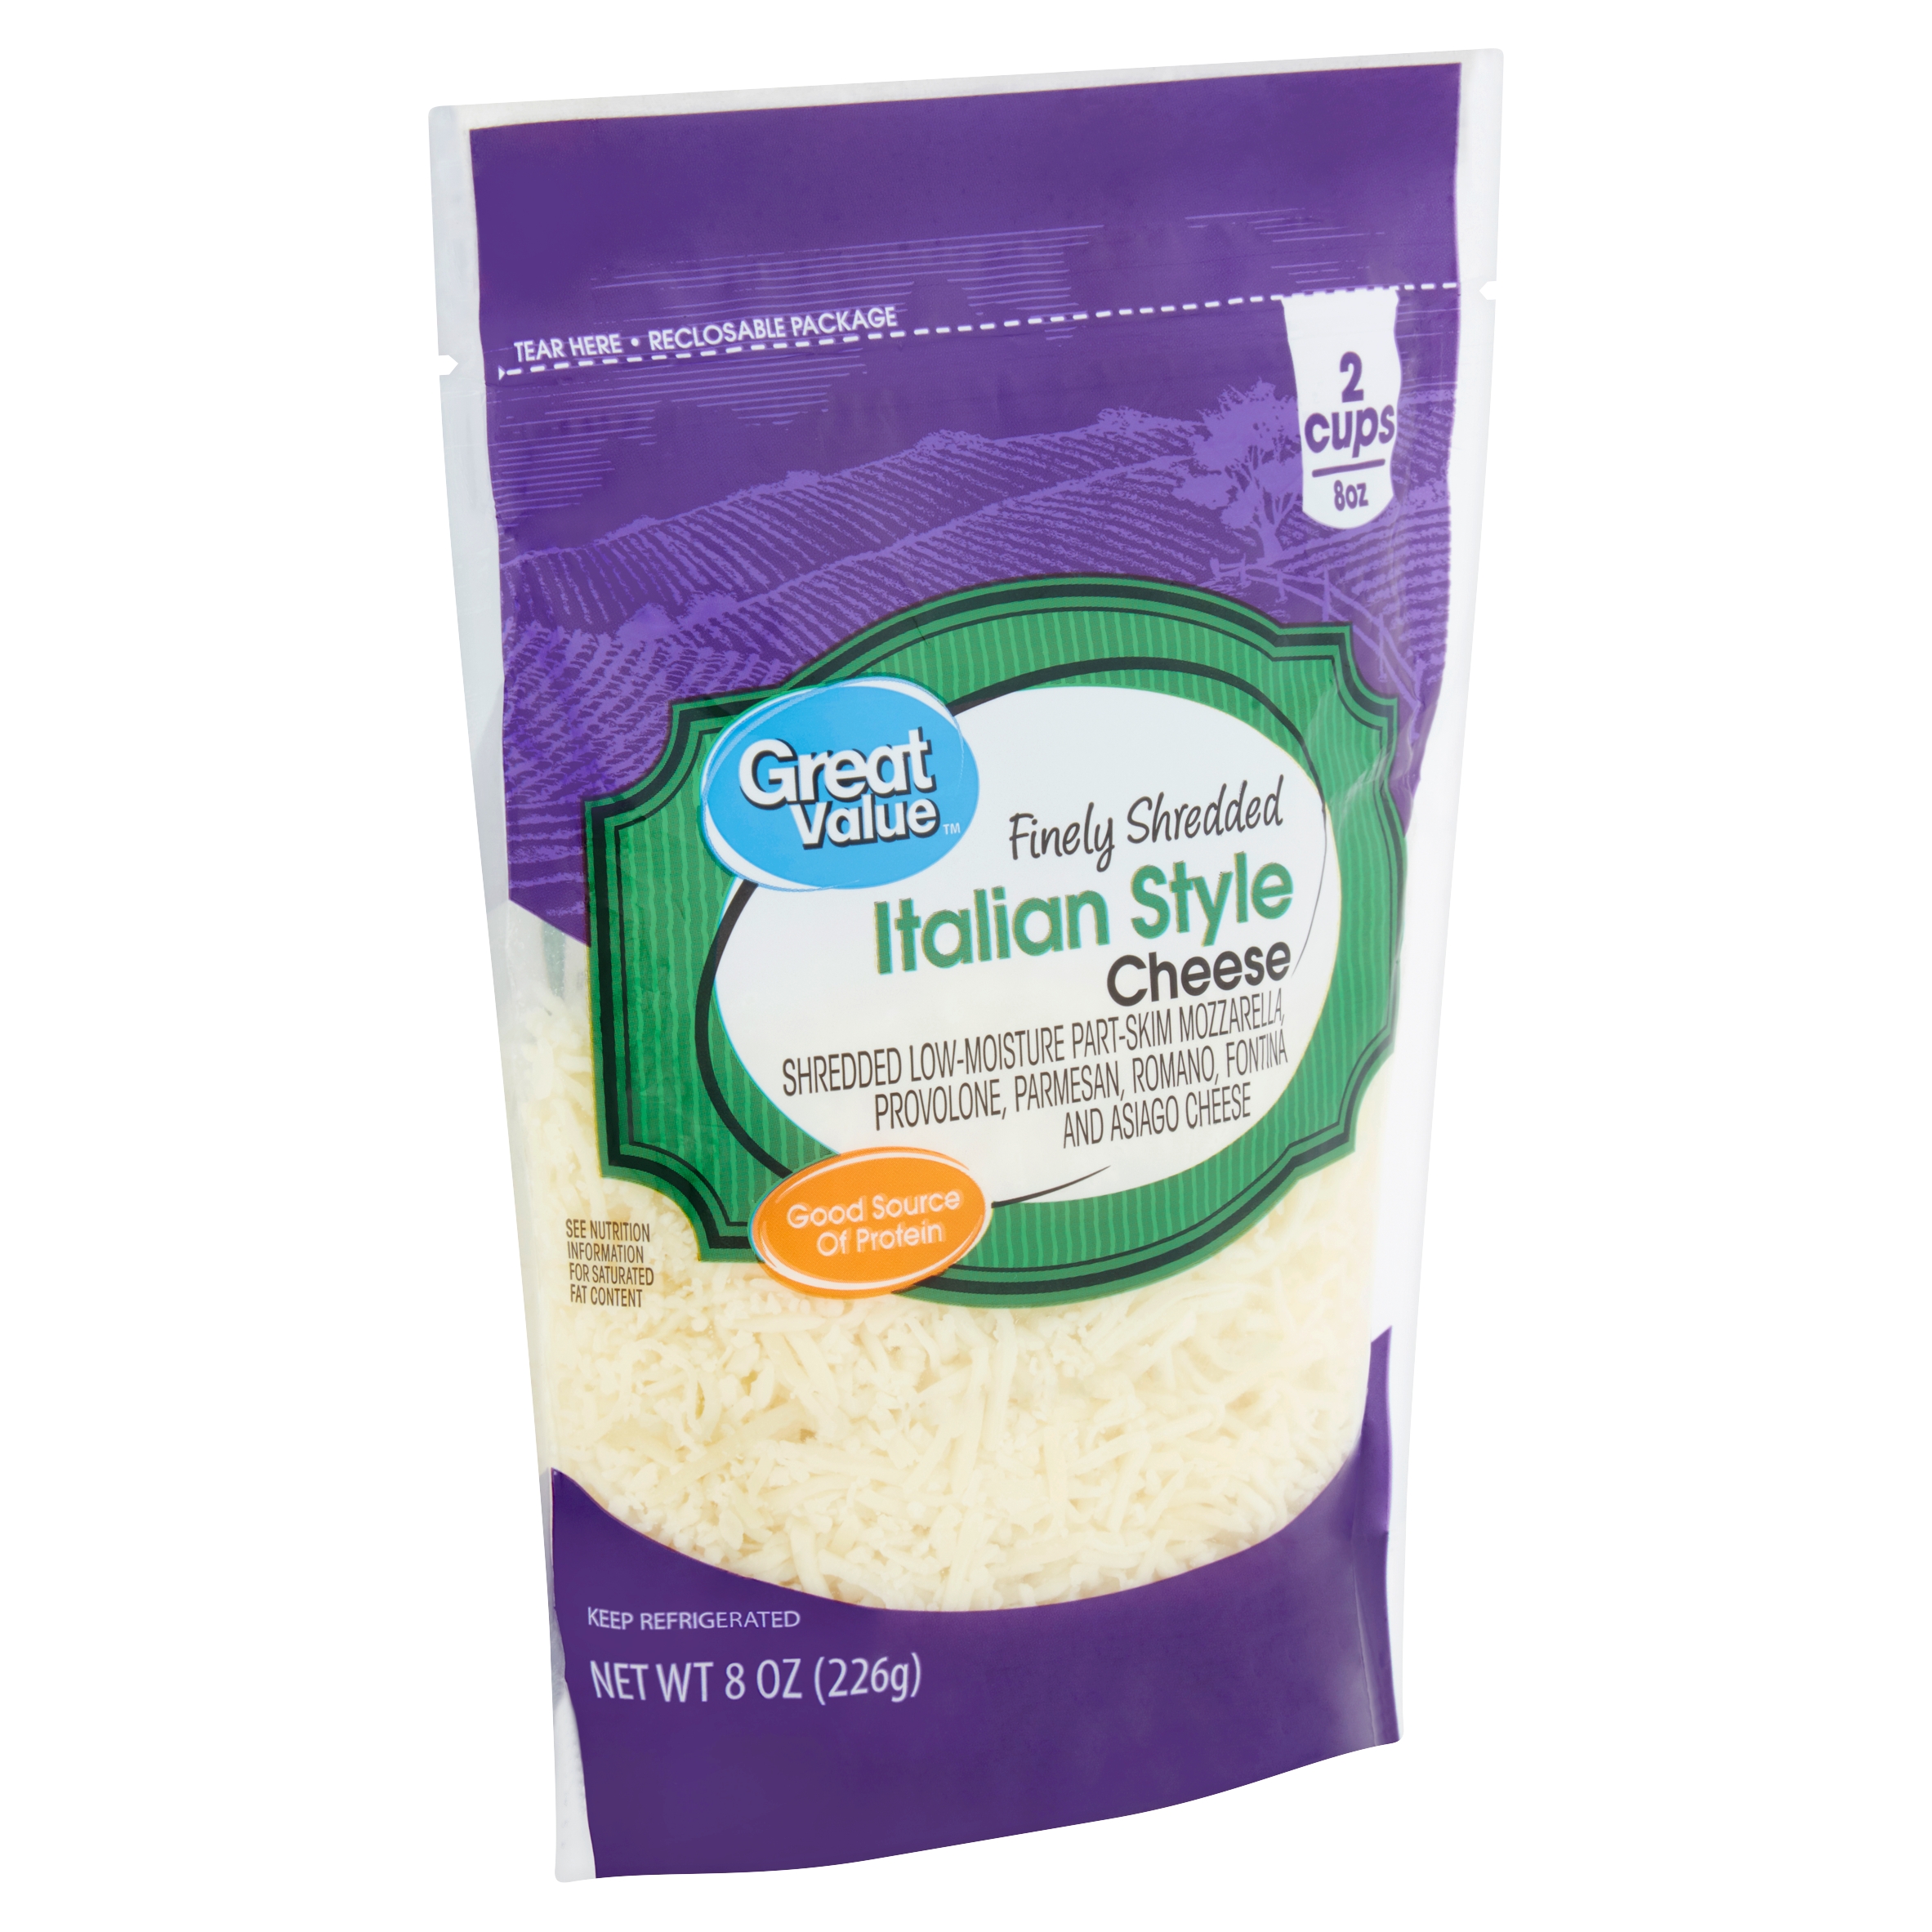 Great Value Finely Shredded Italian Style Cheese, 8 Oz Image